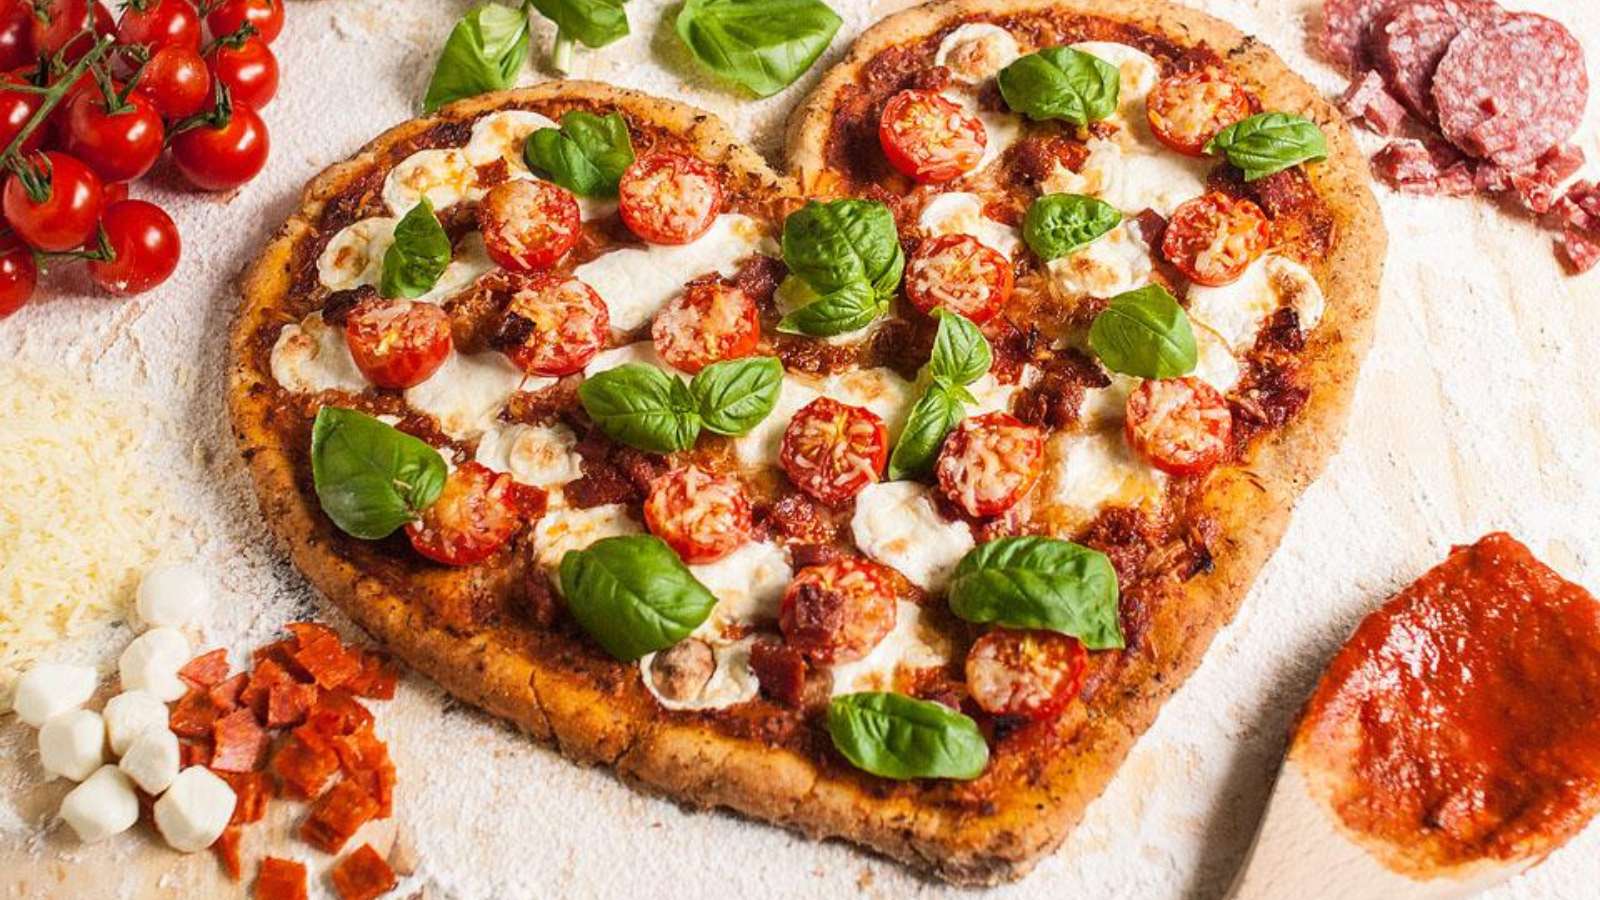 A heart shaped pizza with tomatoes, basil and other ingredients.